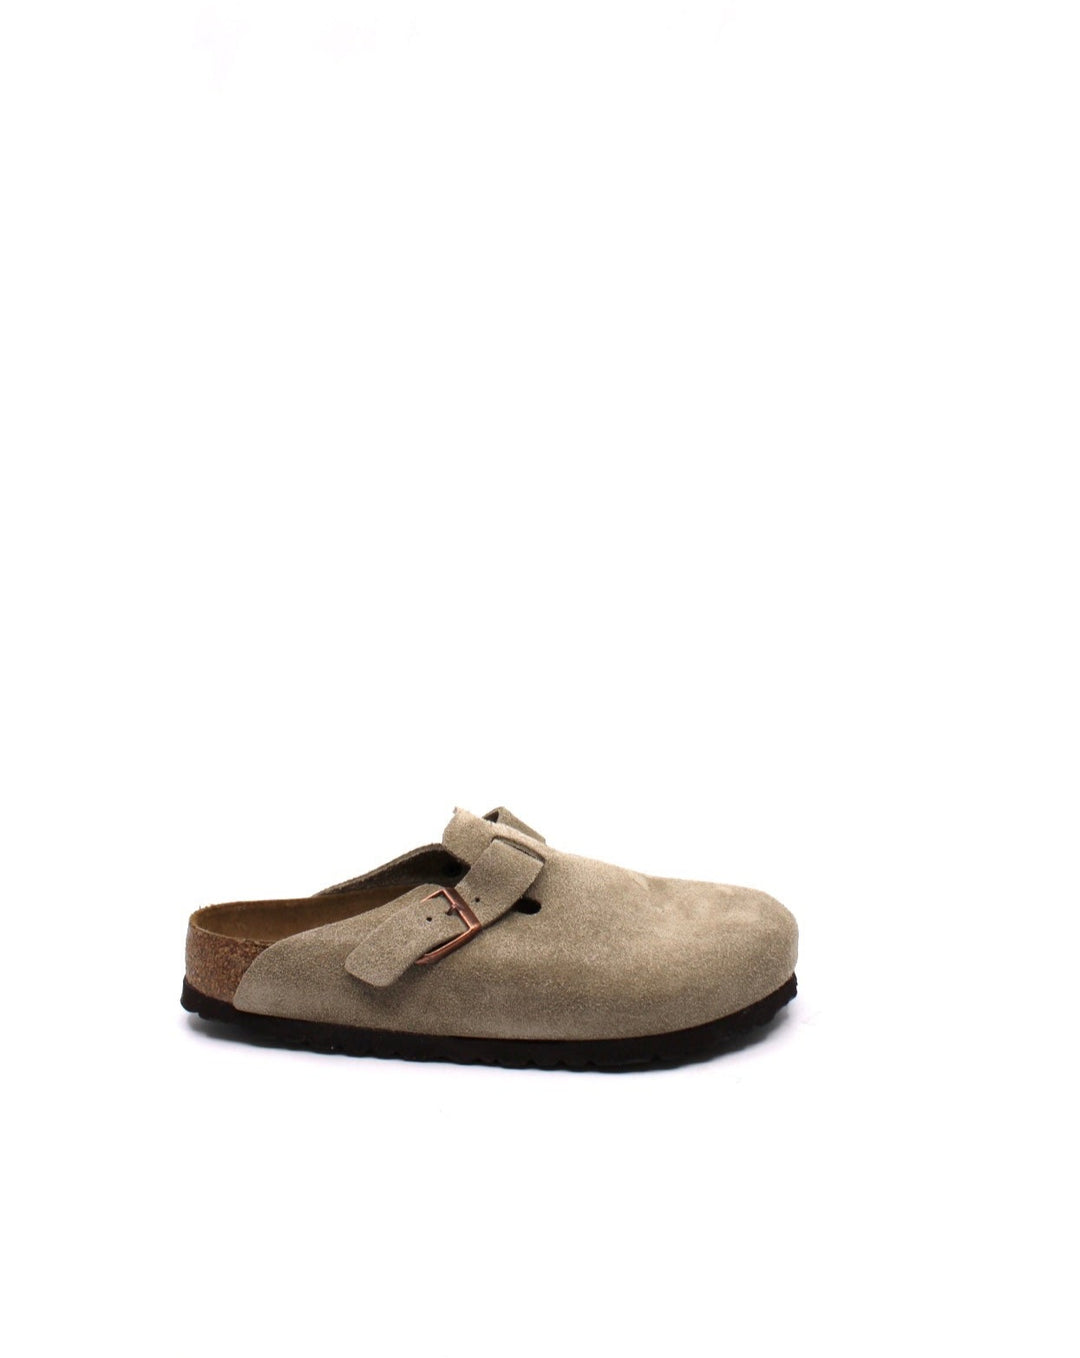 Birkenstock Boston Taupe Suede Soft Footbed - Dear Lucy